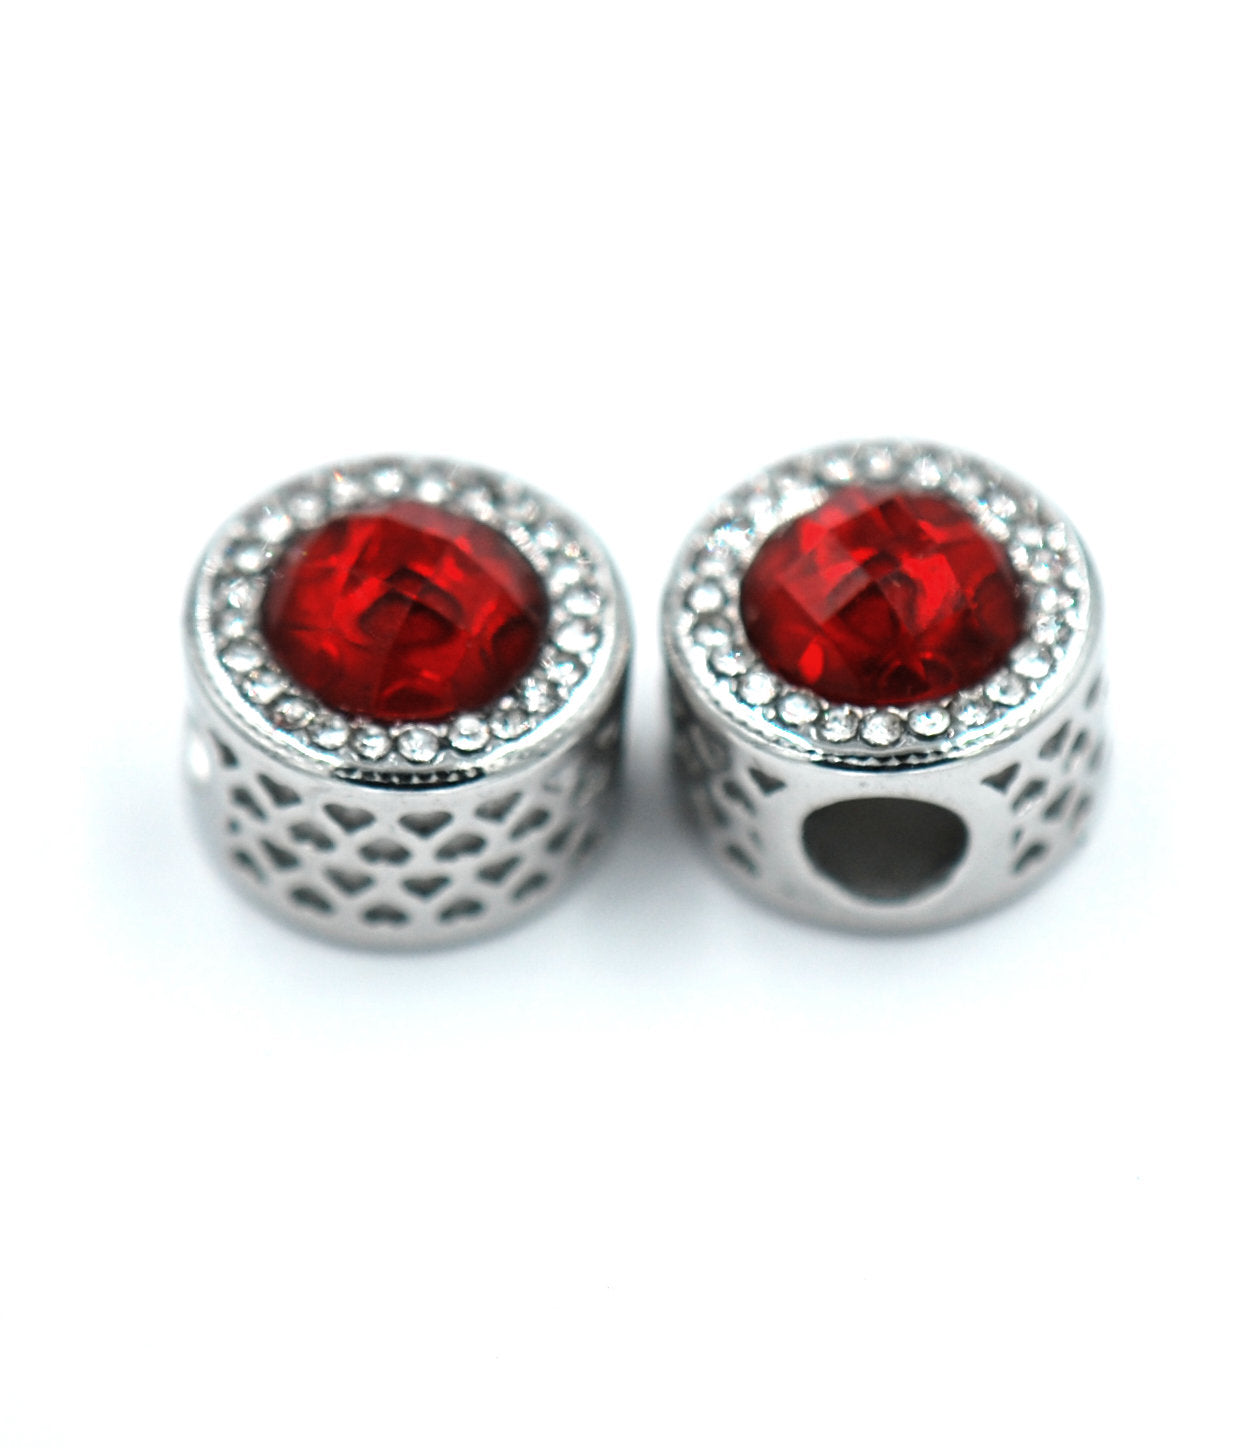 304 Stainless Steel European Beads, Large Hole Beads, with Rhinestone Ruby Red -1pc